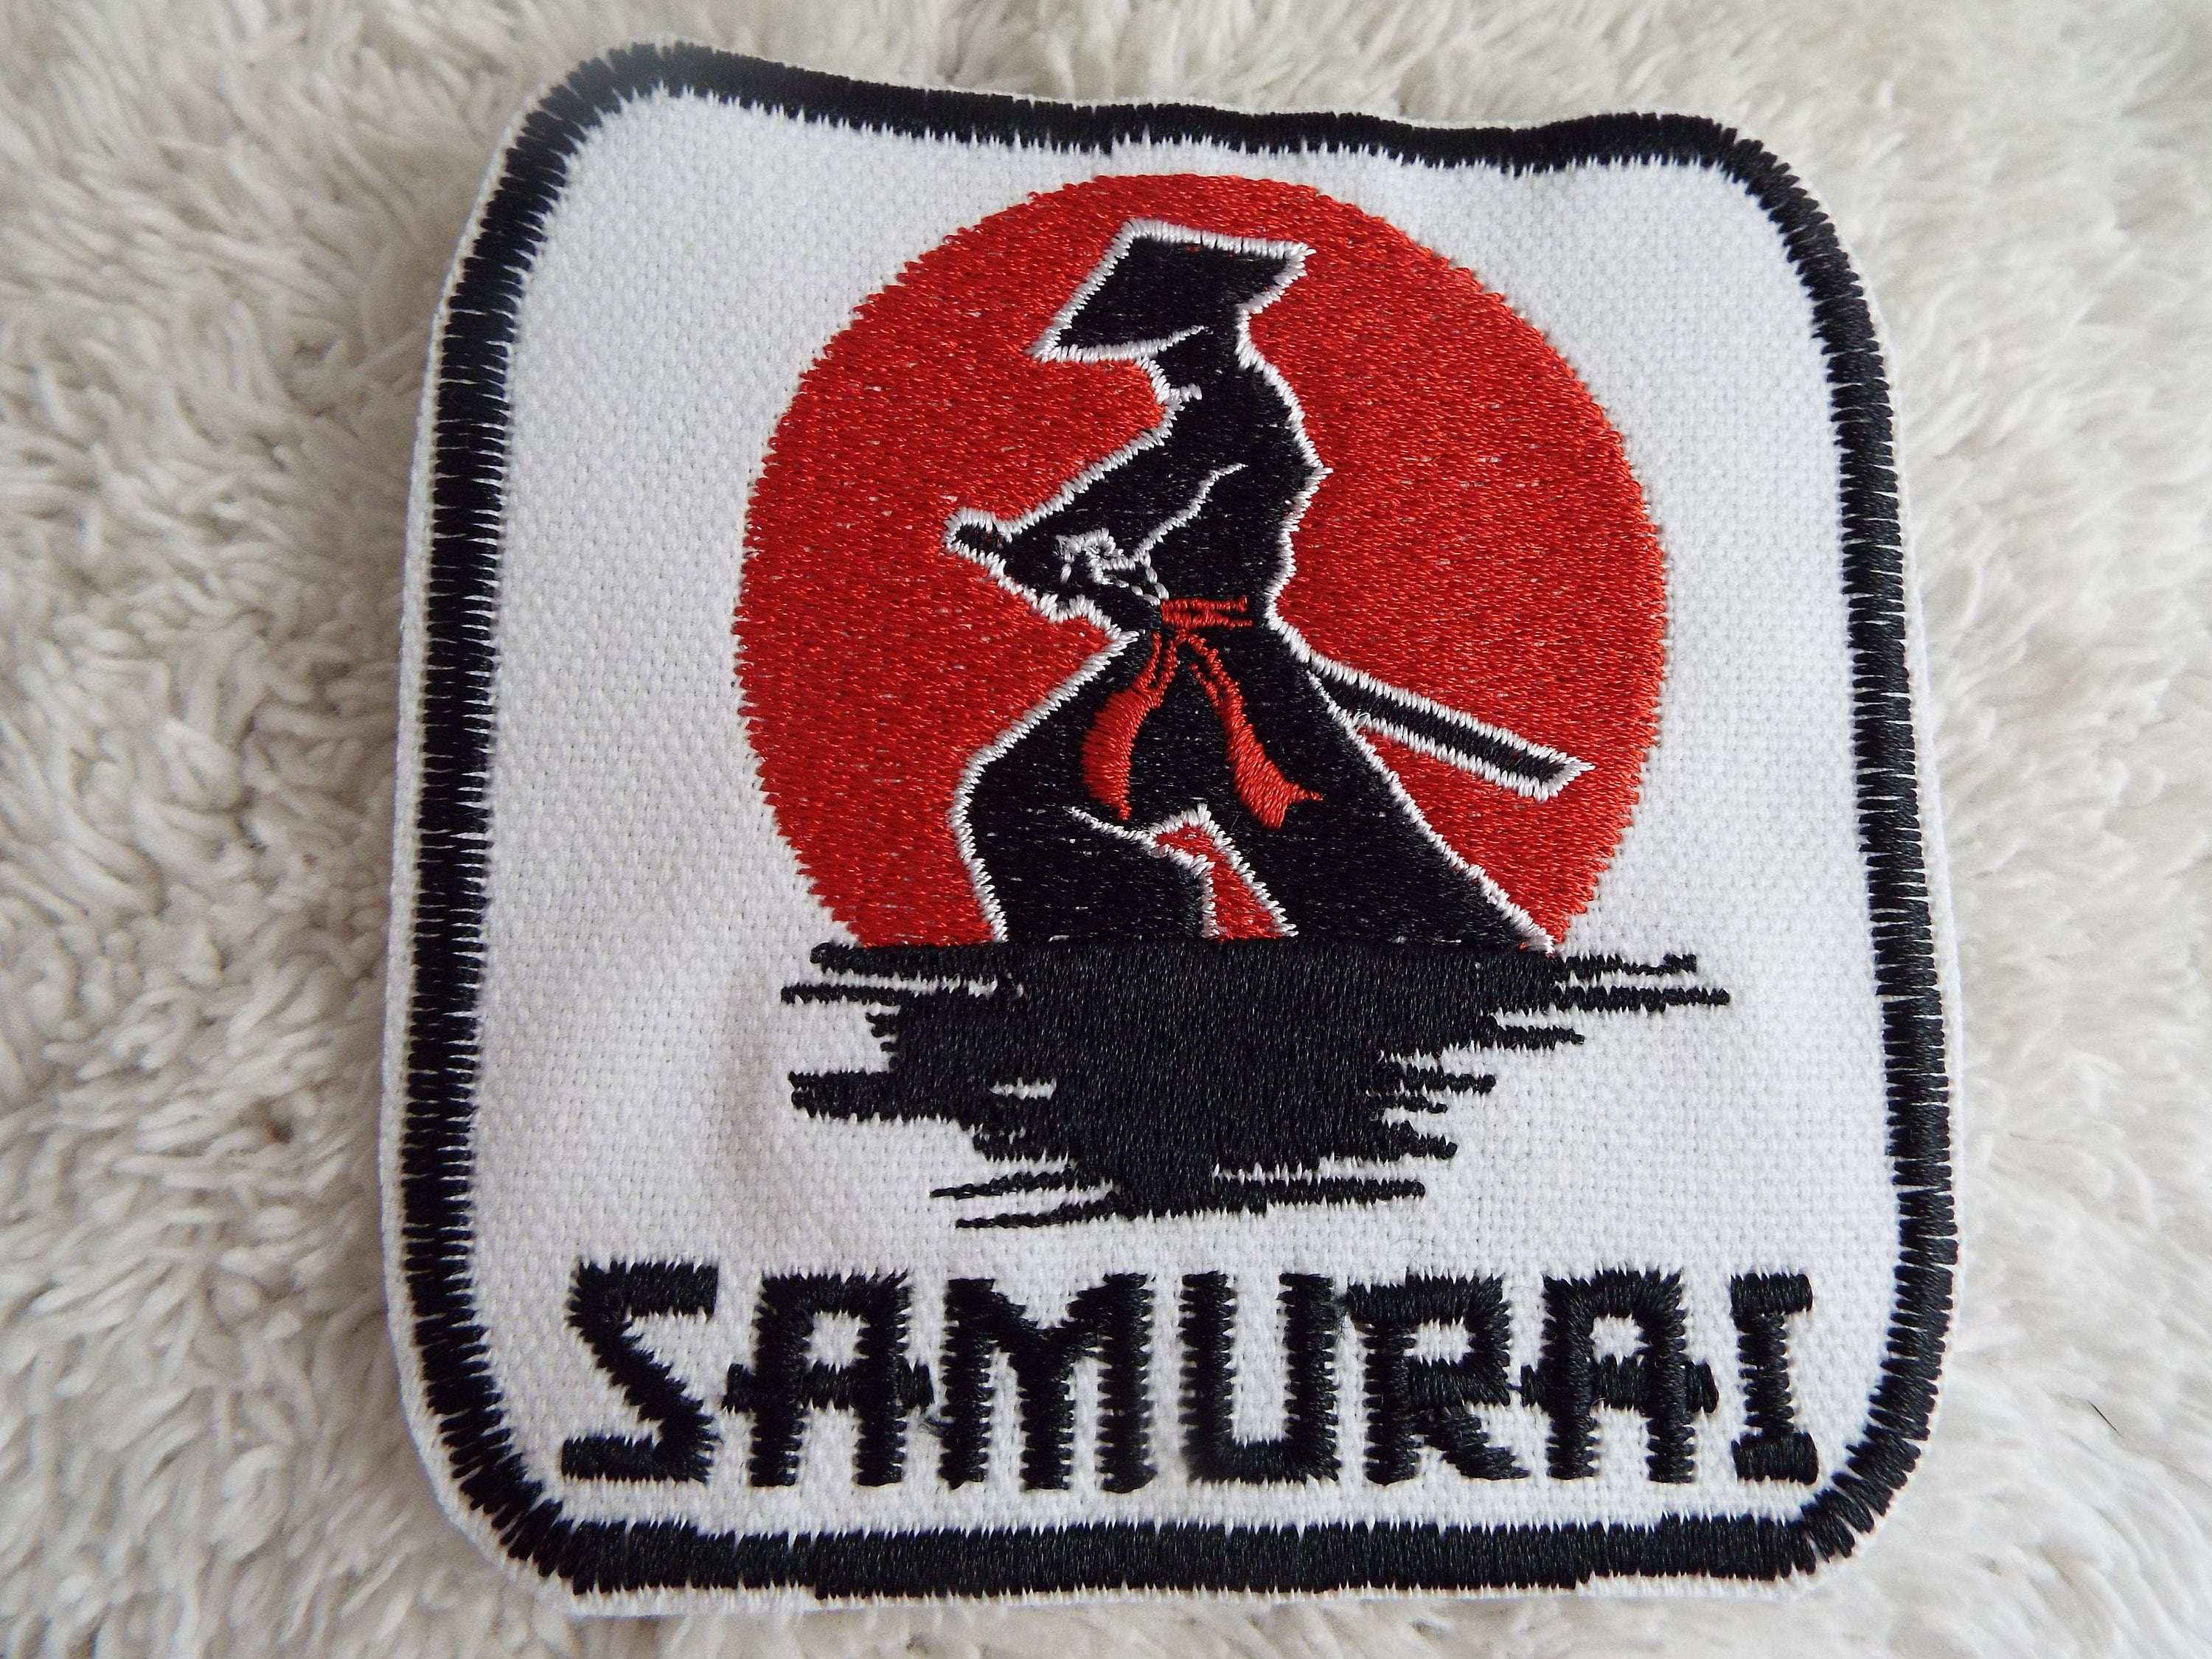 Samurai Warrior Sew on Patch - Japan Anime Iron on Patches for Japanese Patriots, Martial Artists, Fighters - Popular Tactical Patch for Jackets